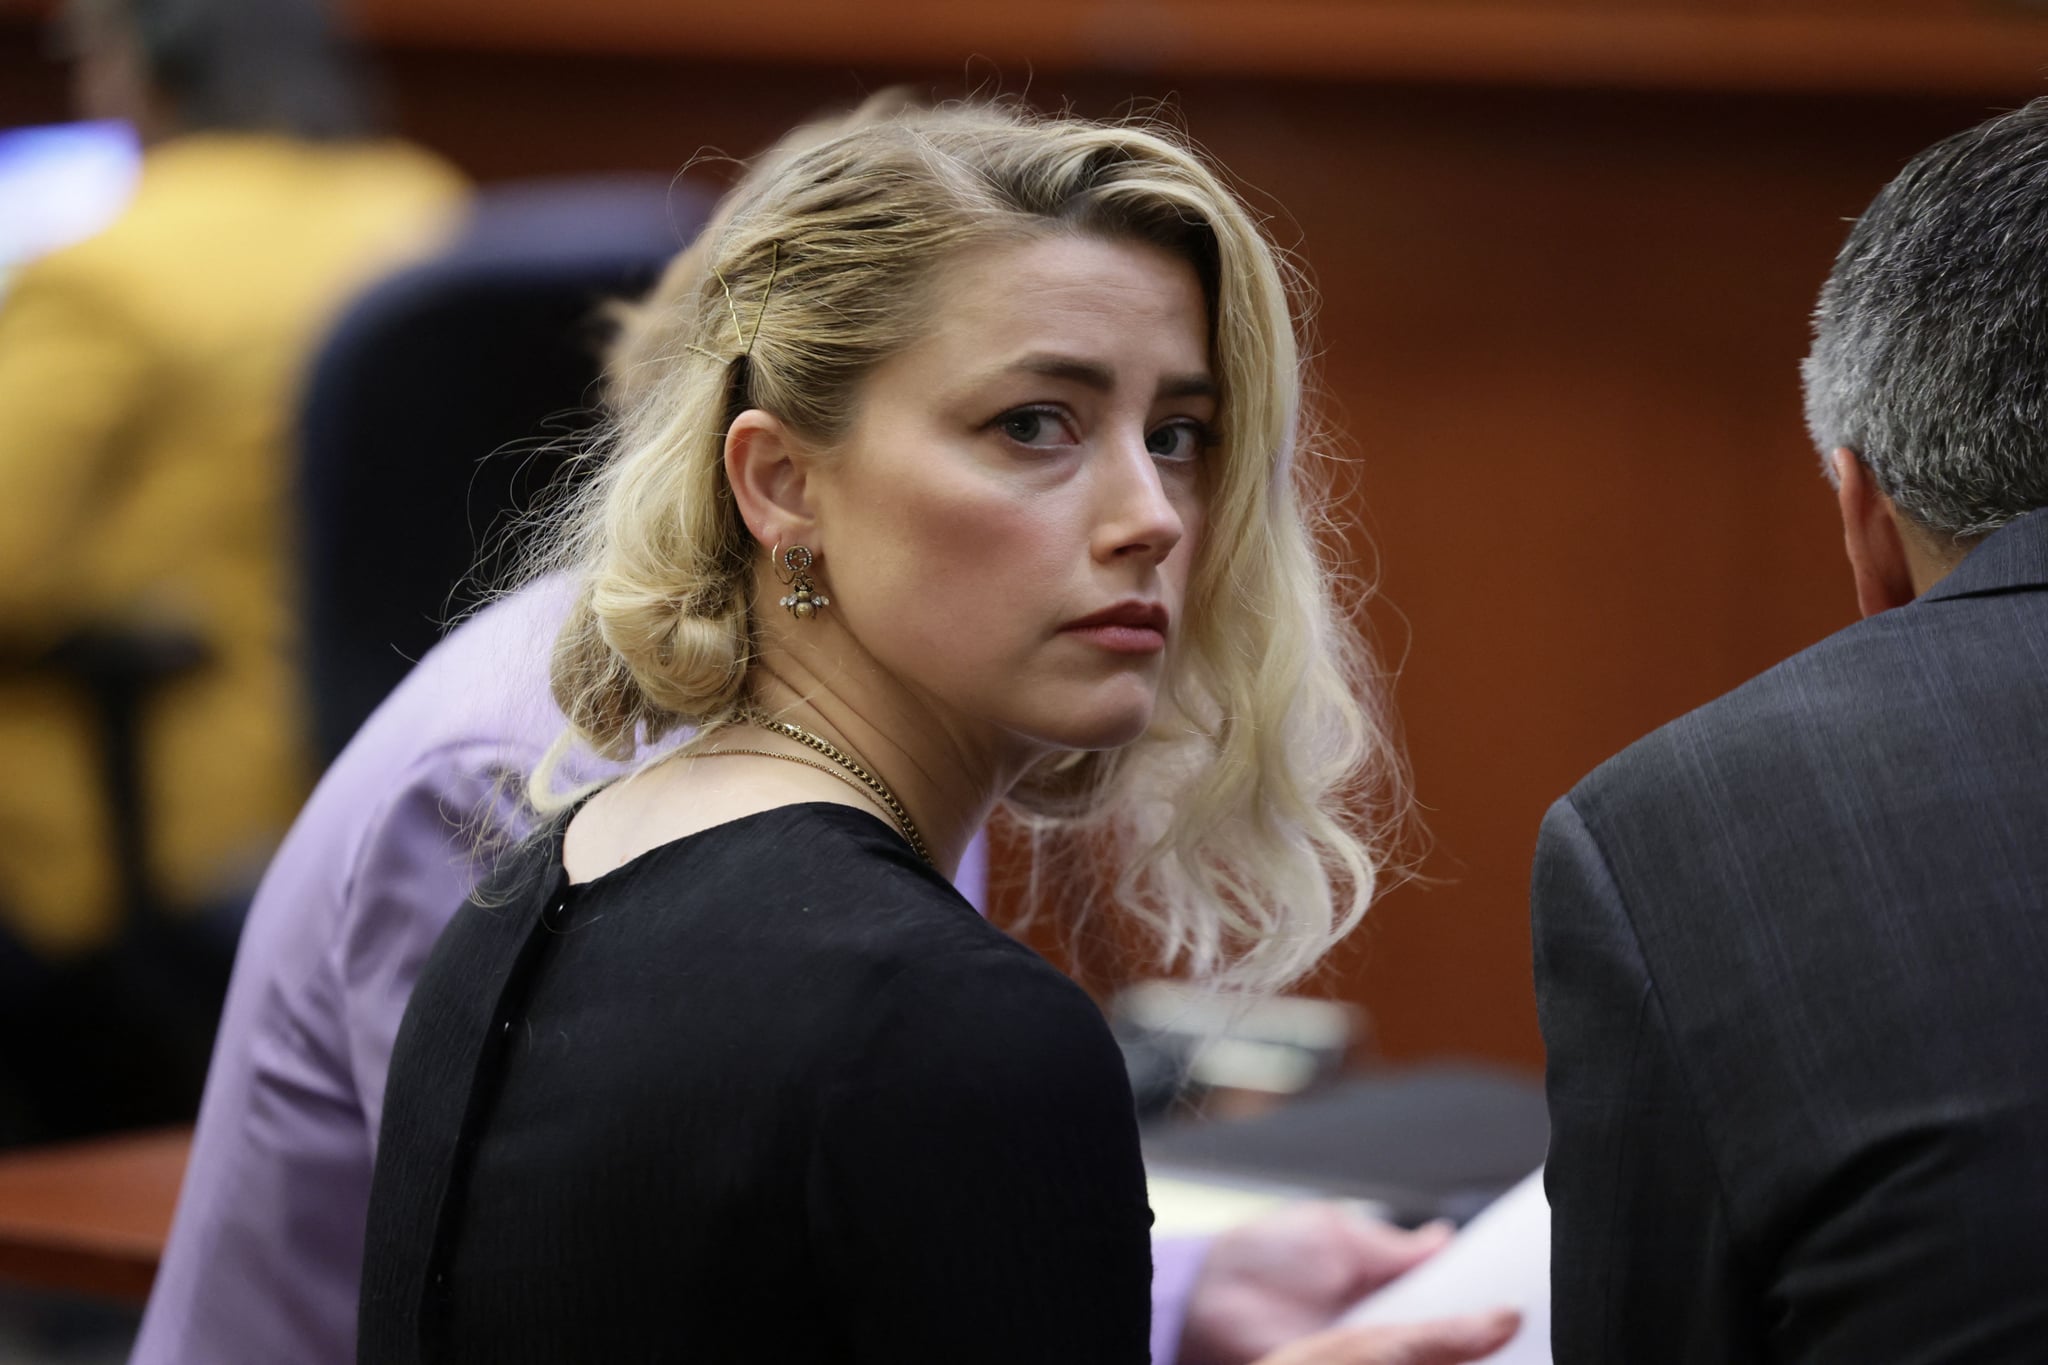 US actress Amber Heard waits before the jury said that they believe she defamed ex-husband Johnny Depp, while announcing split verdicts in favor of both her ex-husband Johnny Depp and Heard on their claim and counter-claim in the Depp v. Heard civil defamation trial at the Fairfax County Circuit Courthouse in Fairfax, Virginia, on June 1, 2022. - A US jury on Wednesday found Johnny Depp and Amber Heard defamed each other, but sided far more strongly with the 